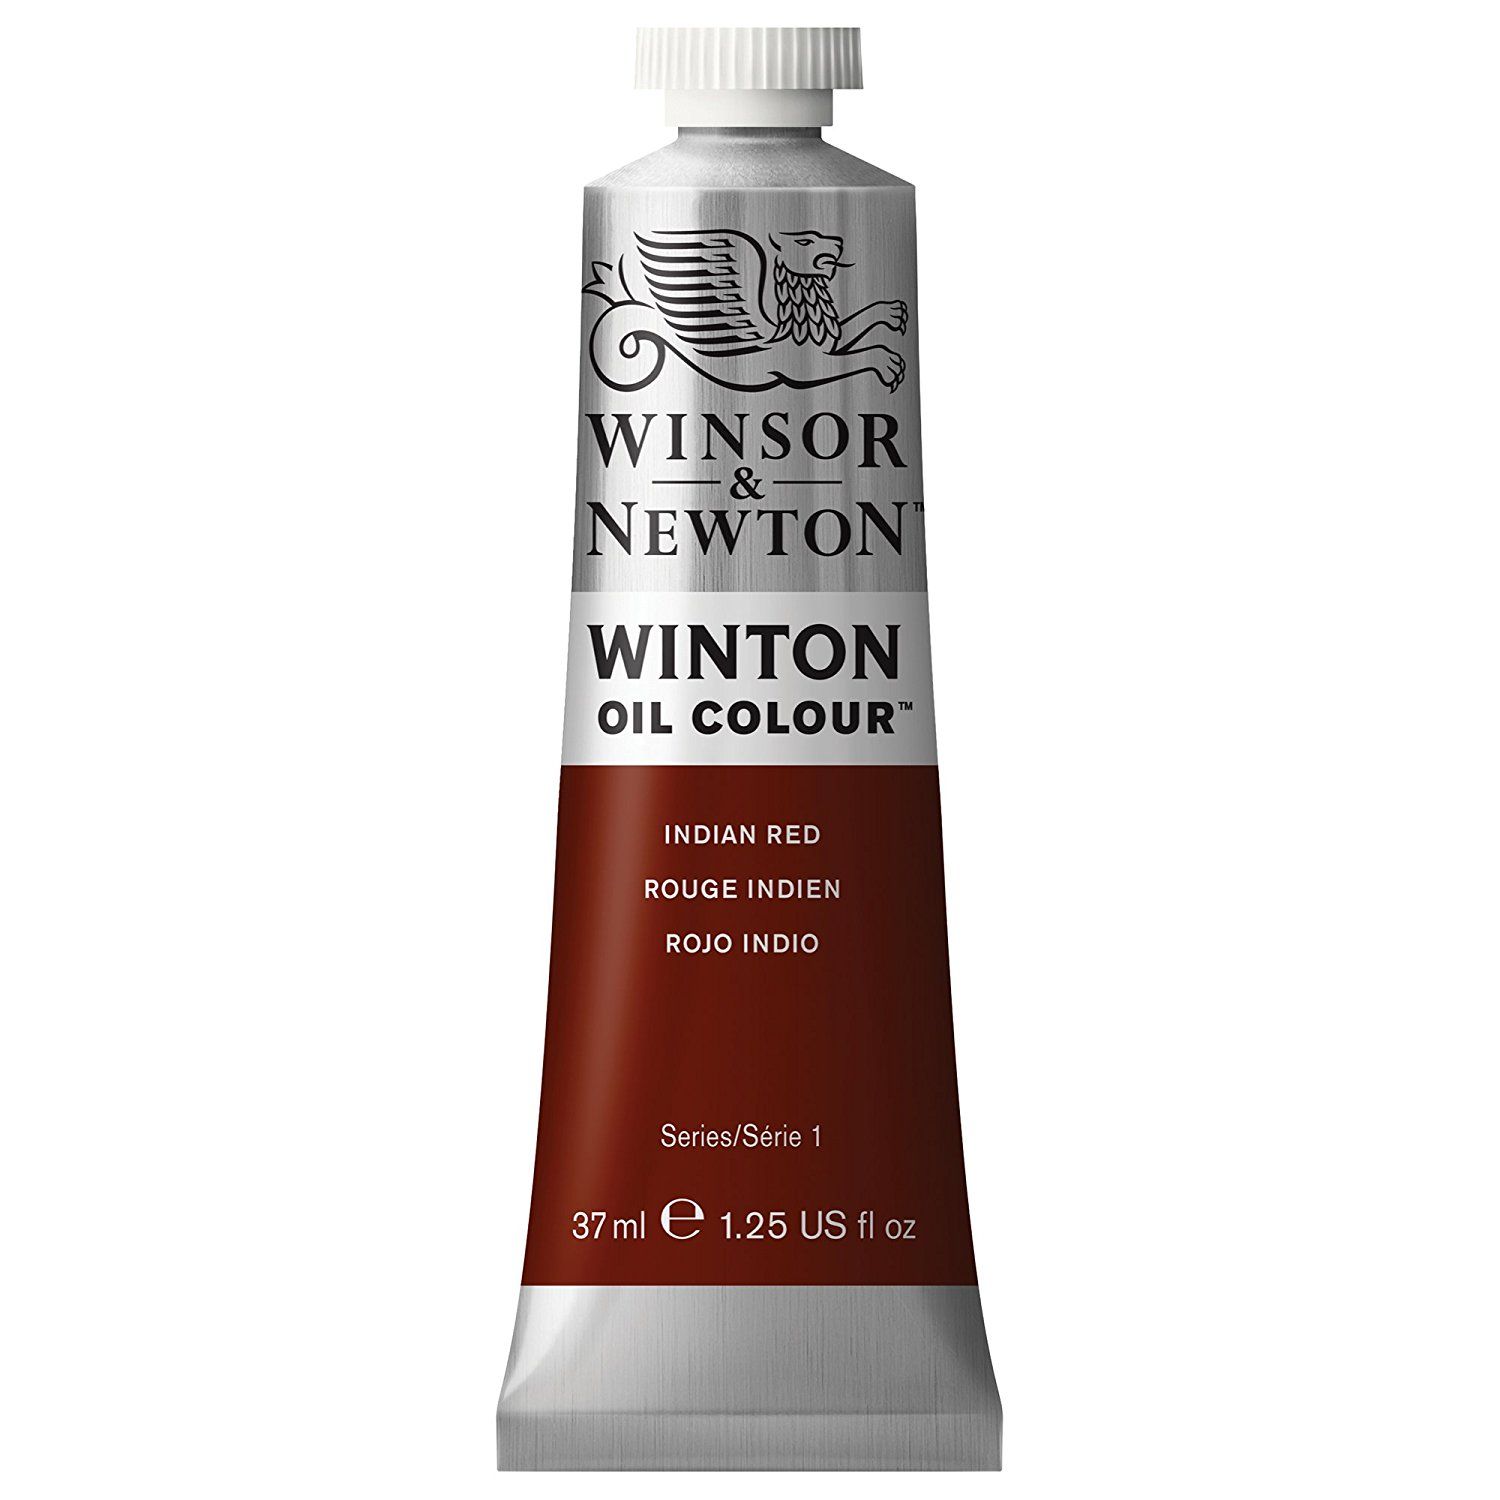 Winton Oil Paint - Indian Red 37ml